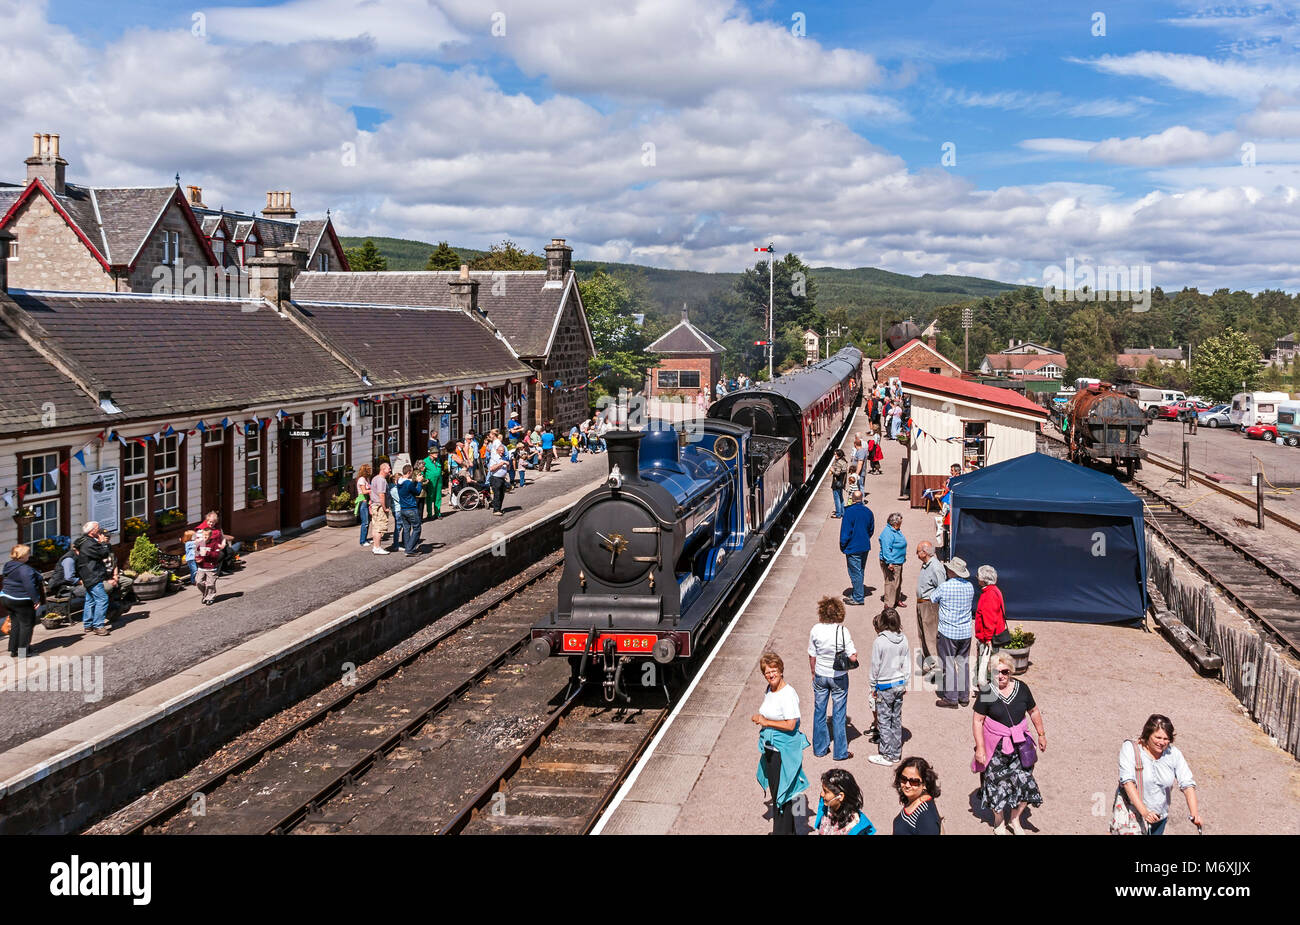 Caledonian Railway 0-6-0 C.R. No. 828 arrives at the Railway Station during the Boat of Garten Steam Fair July 2010 Speyside Highland Scotland UK Stock Photo